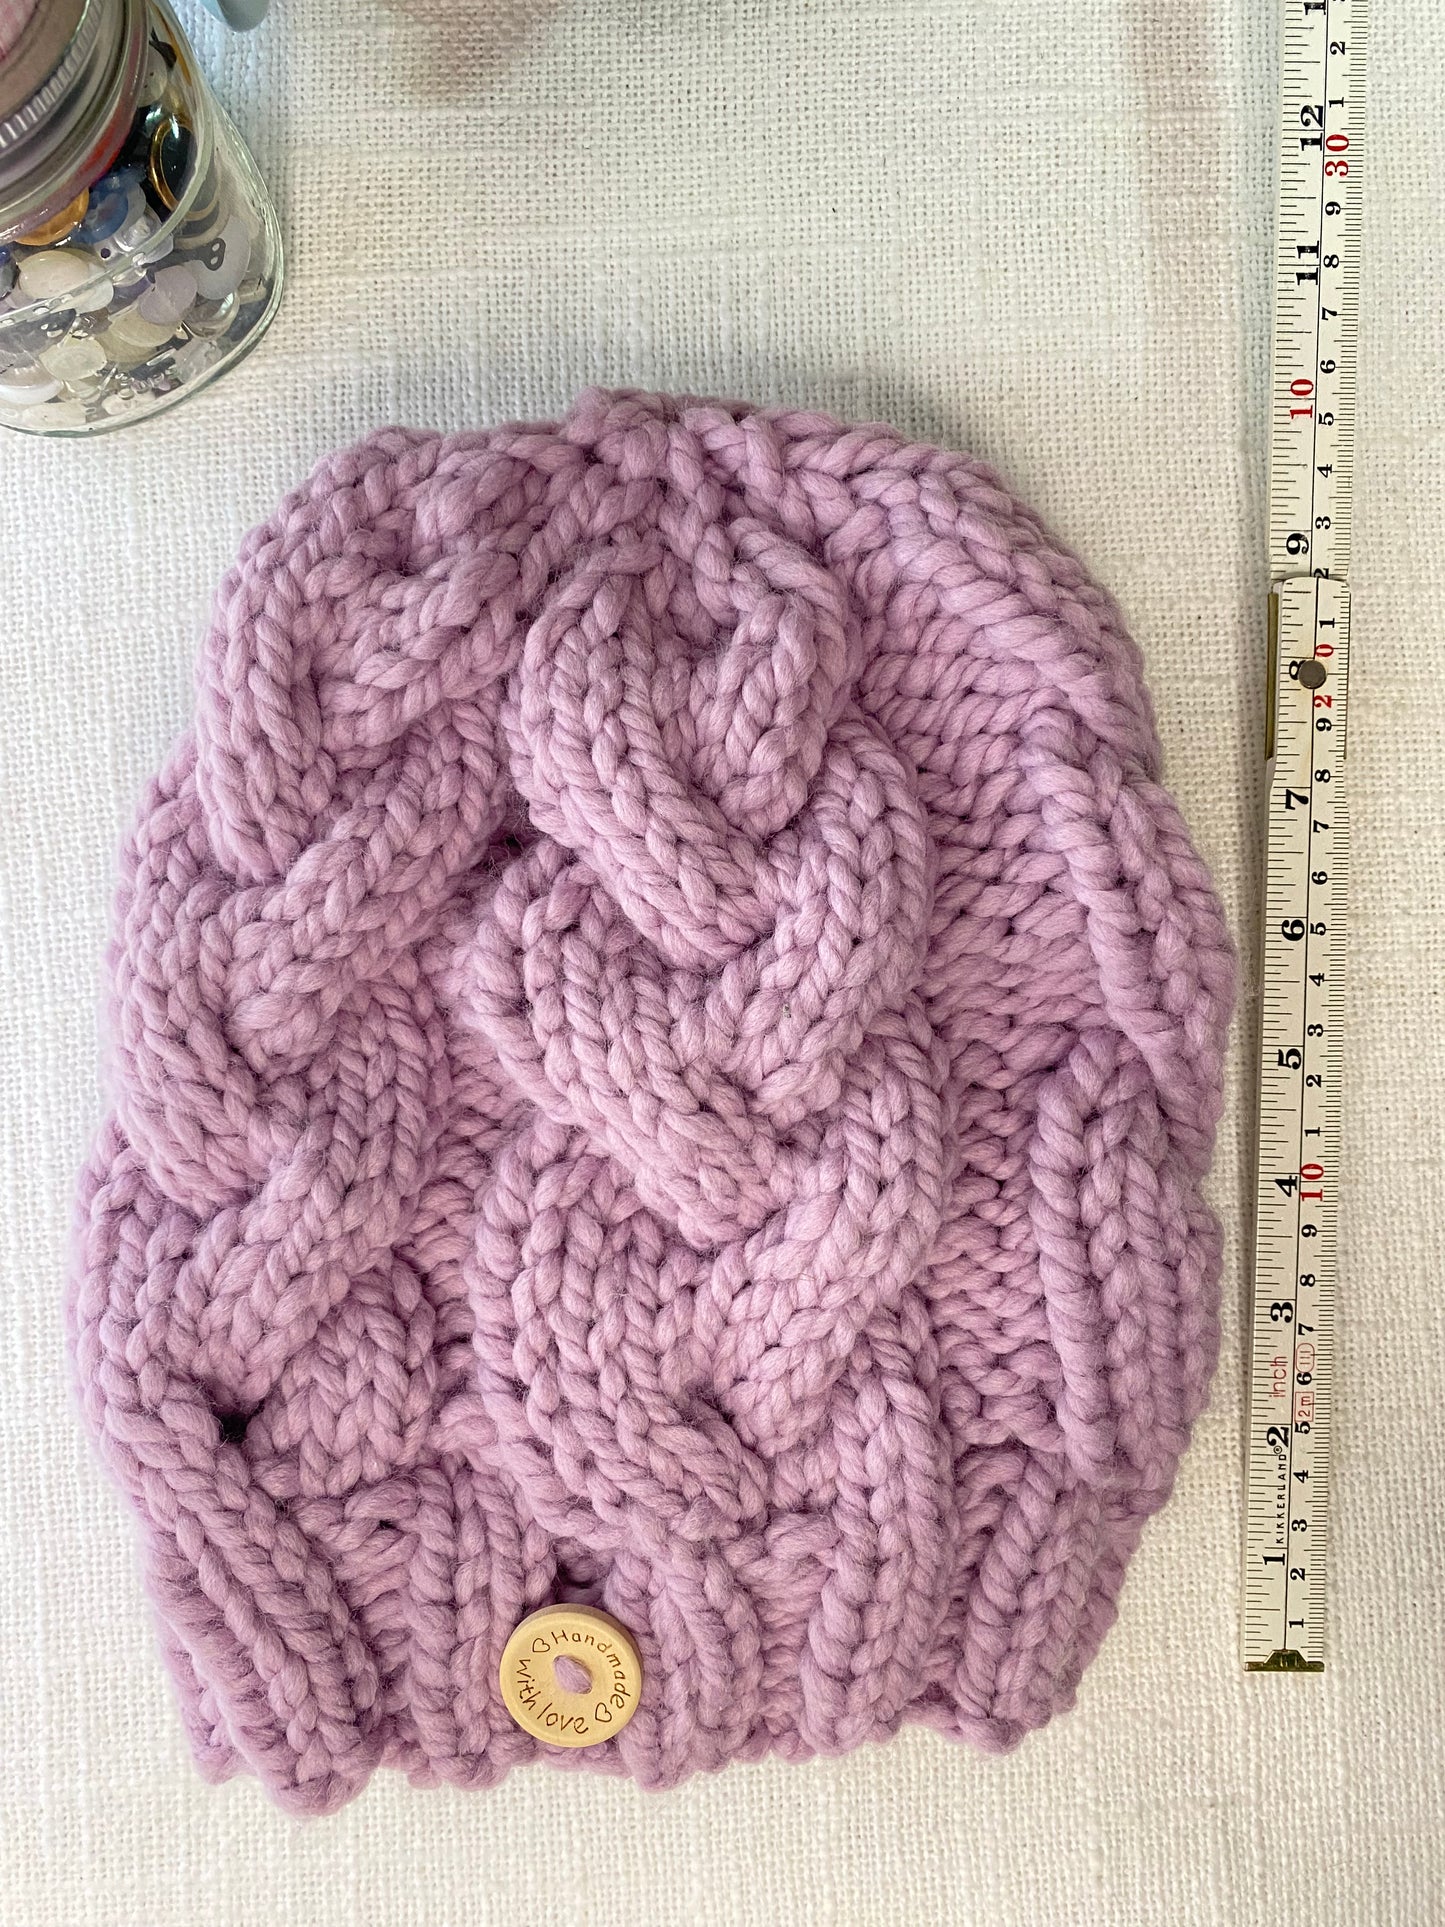 Cozy Cables Hat - Wool Blend Fiber in Black Raspberry Ice Cream